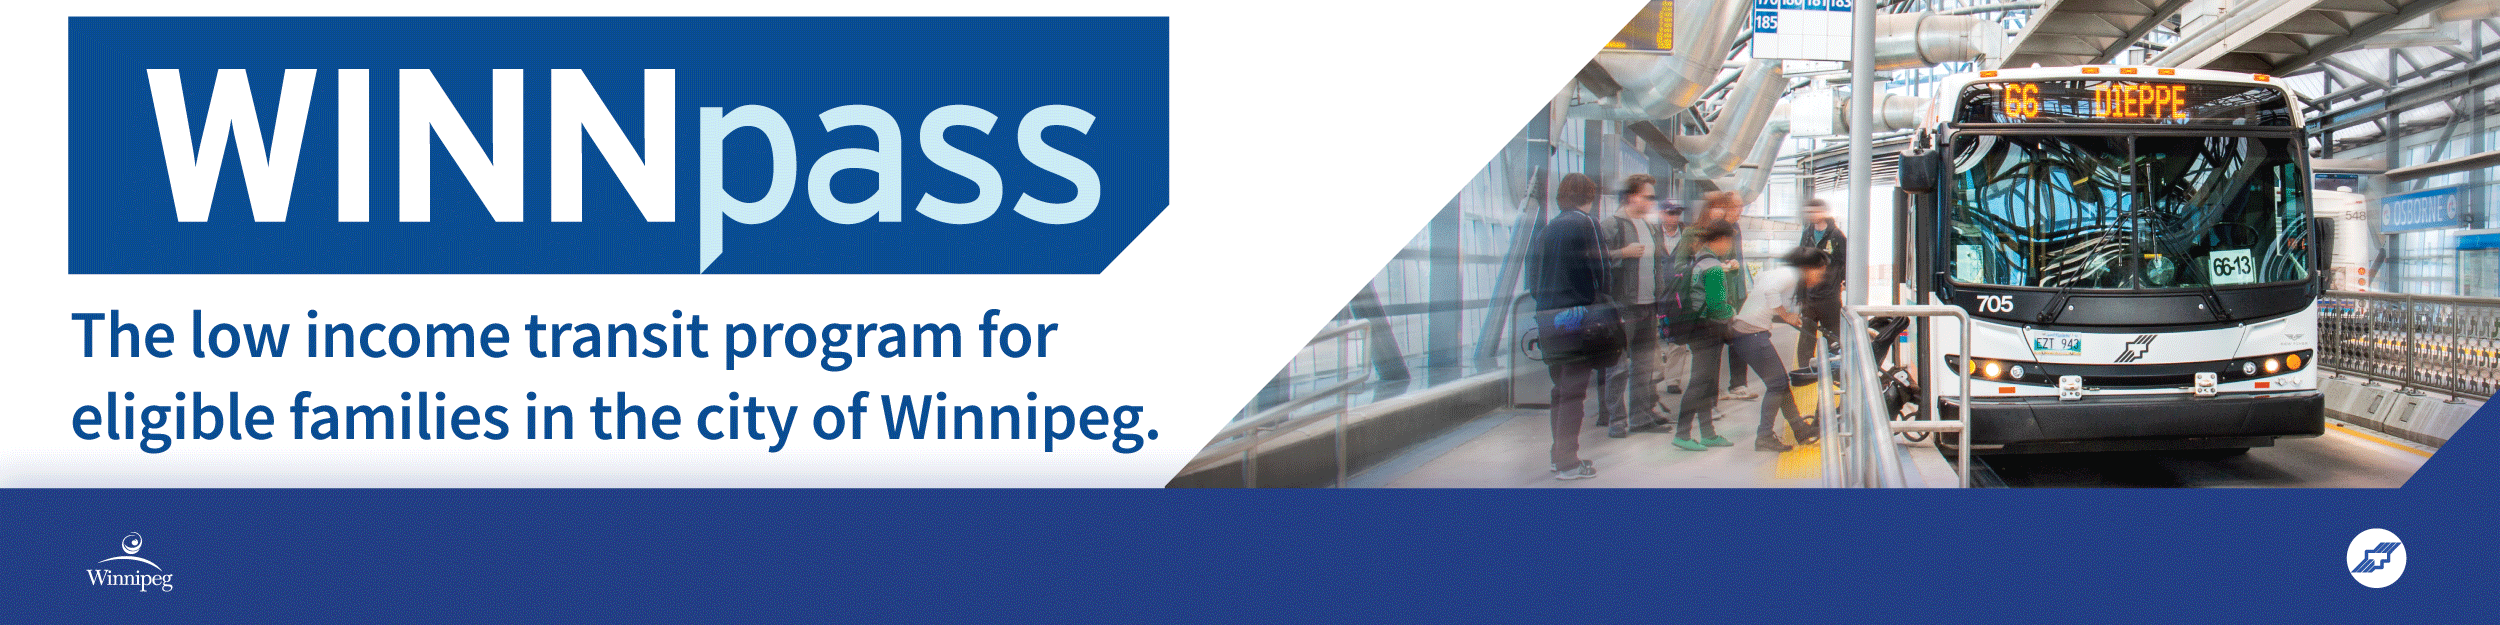 People getting on a bus at a rapid transit station, text reads WINNpass The new low income transit program for eligible families in the City of Winnipeg